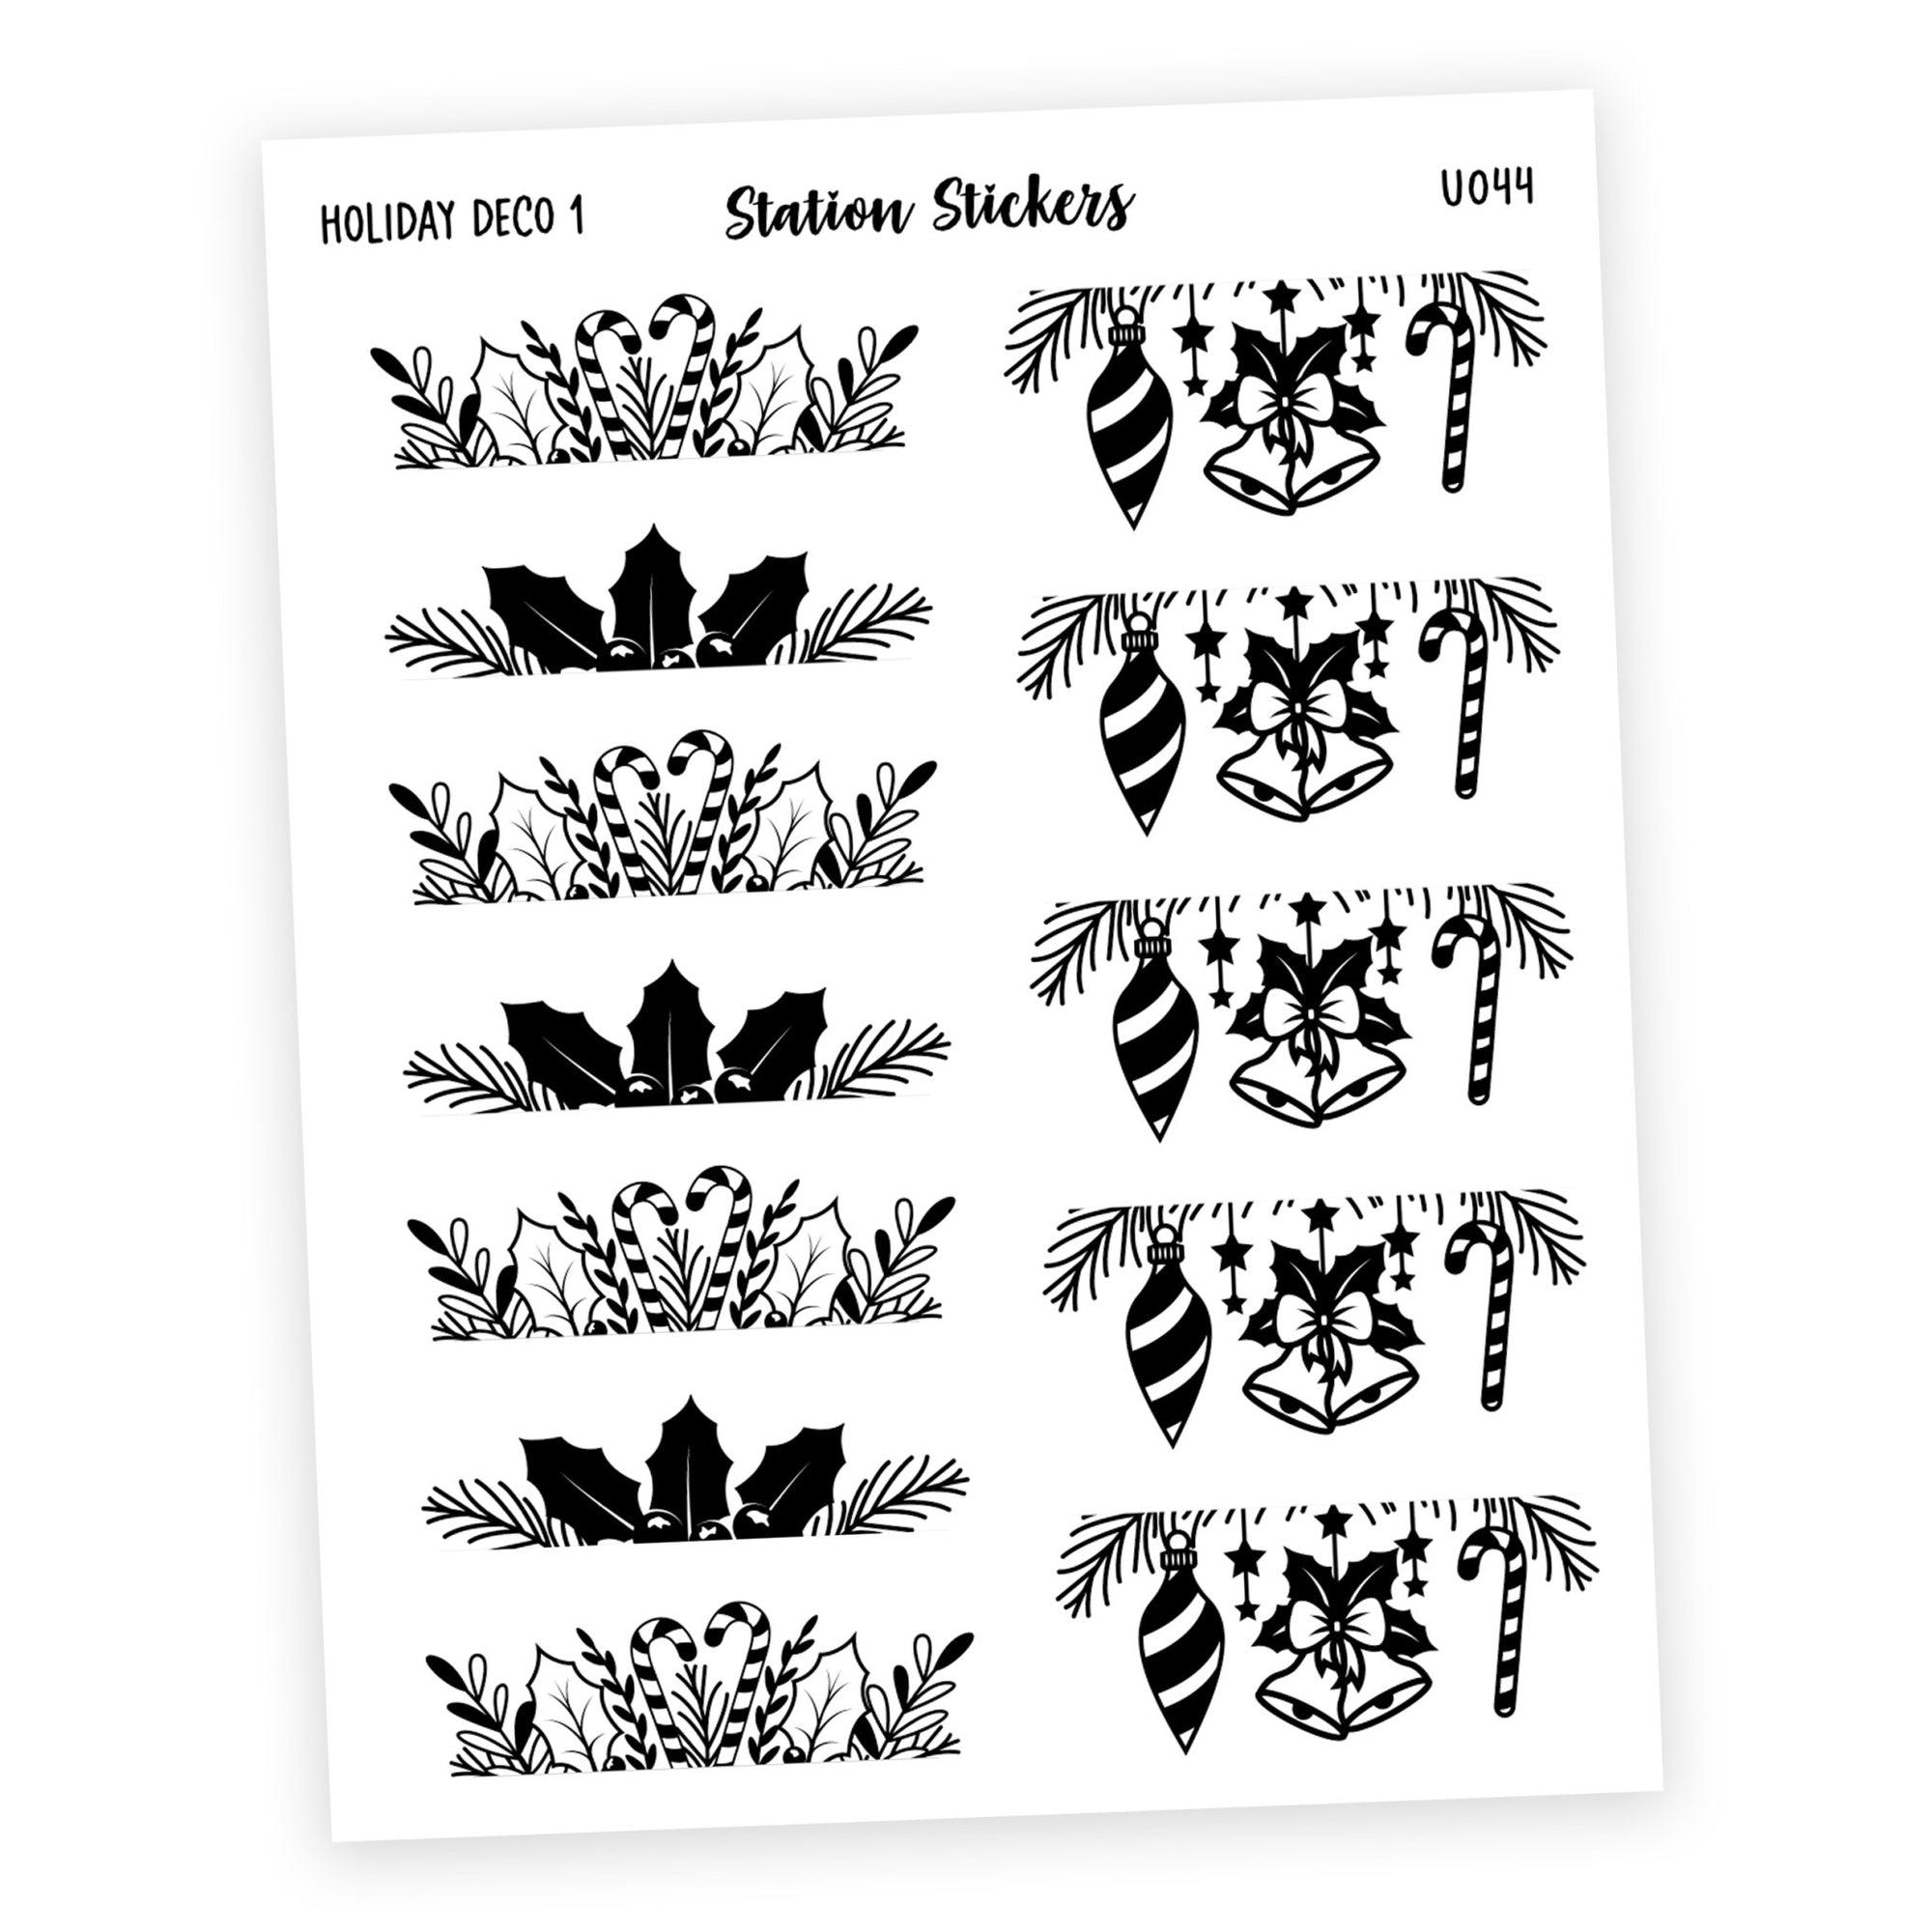 DECO • HOLIDAY 1 - Station Stickers